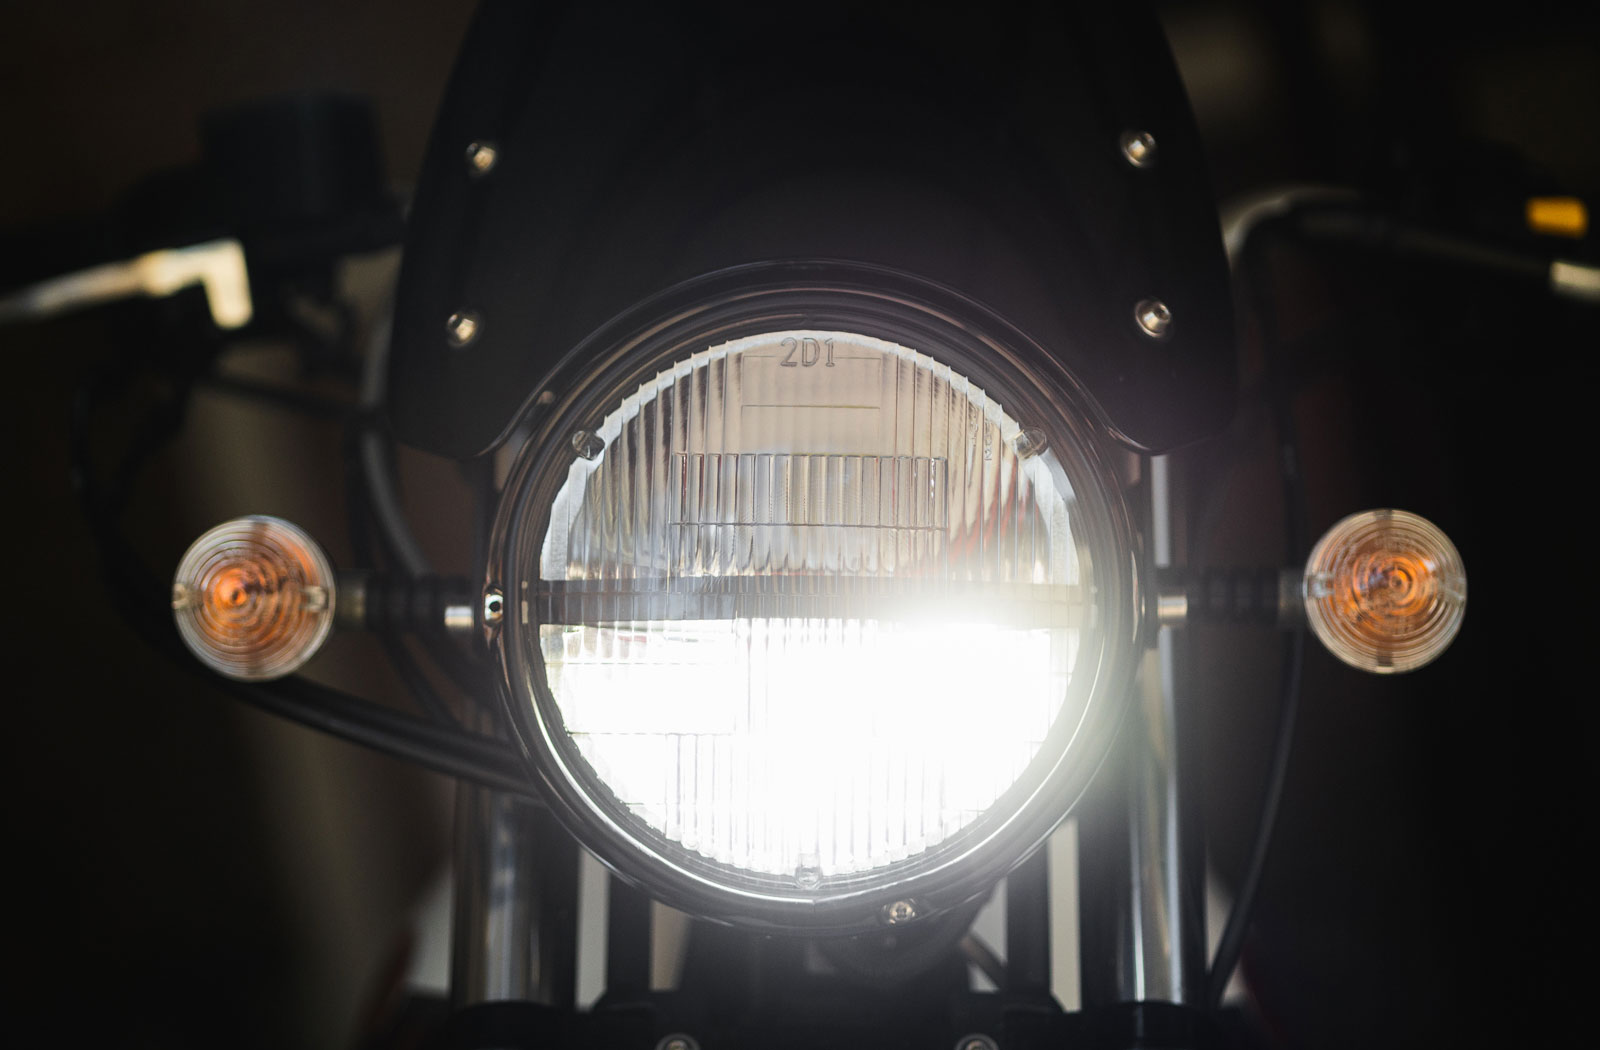 Revival Cycles retro LED 7 headlight review